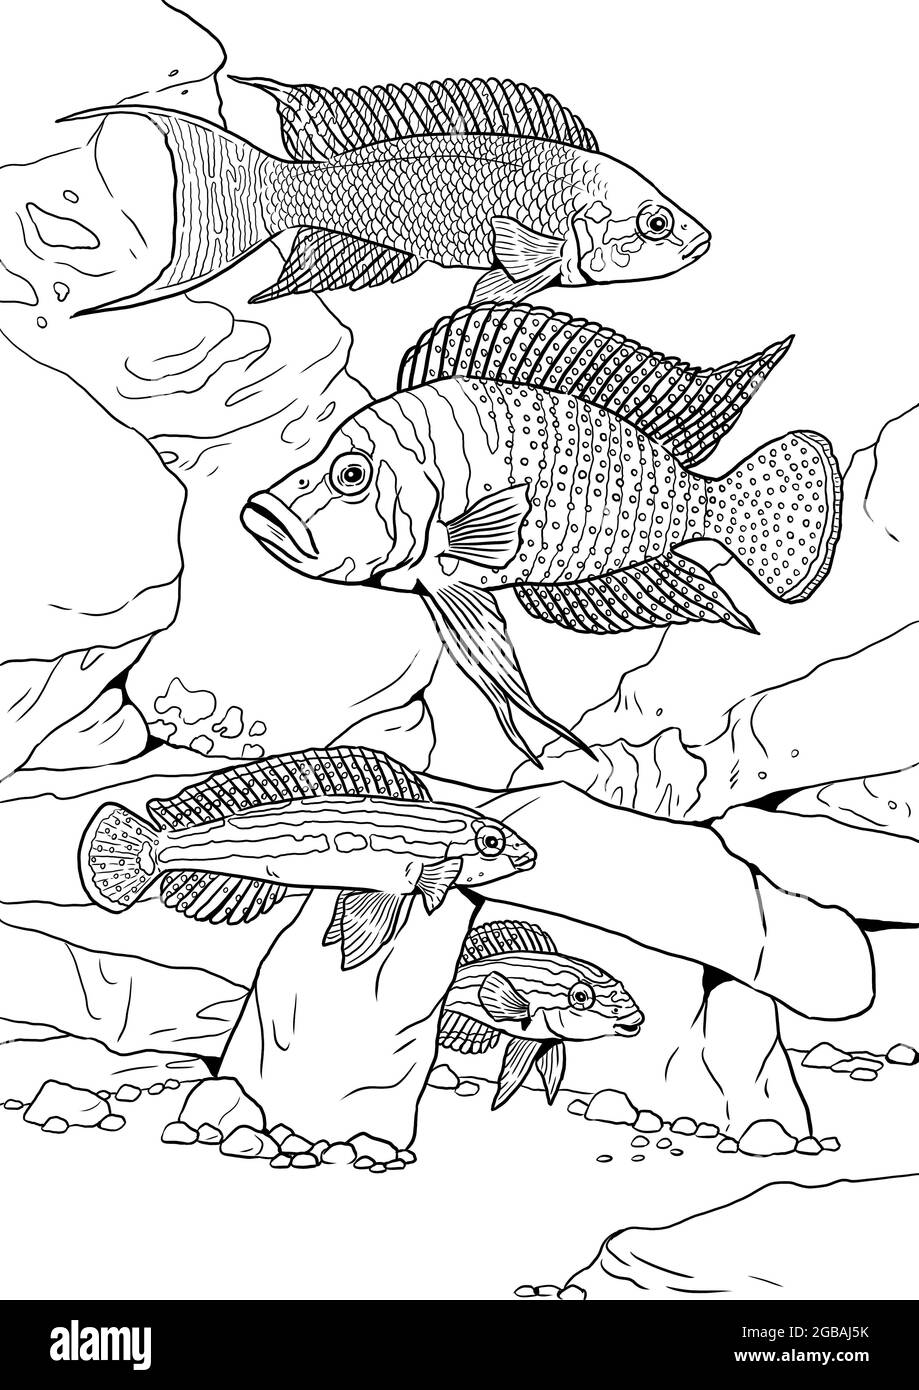 Aquarium with cichlids from the Tanganyika lake for coloring. Colorful african fish template. Coloring book for children and adults. Stock Photo